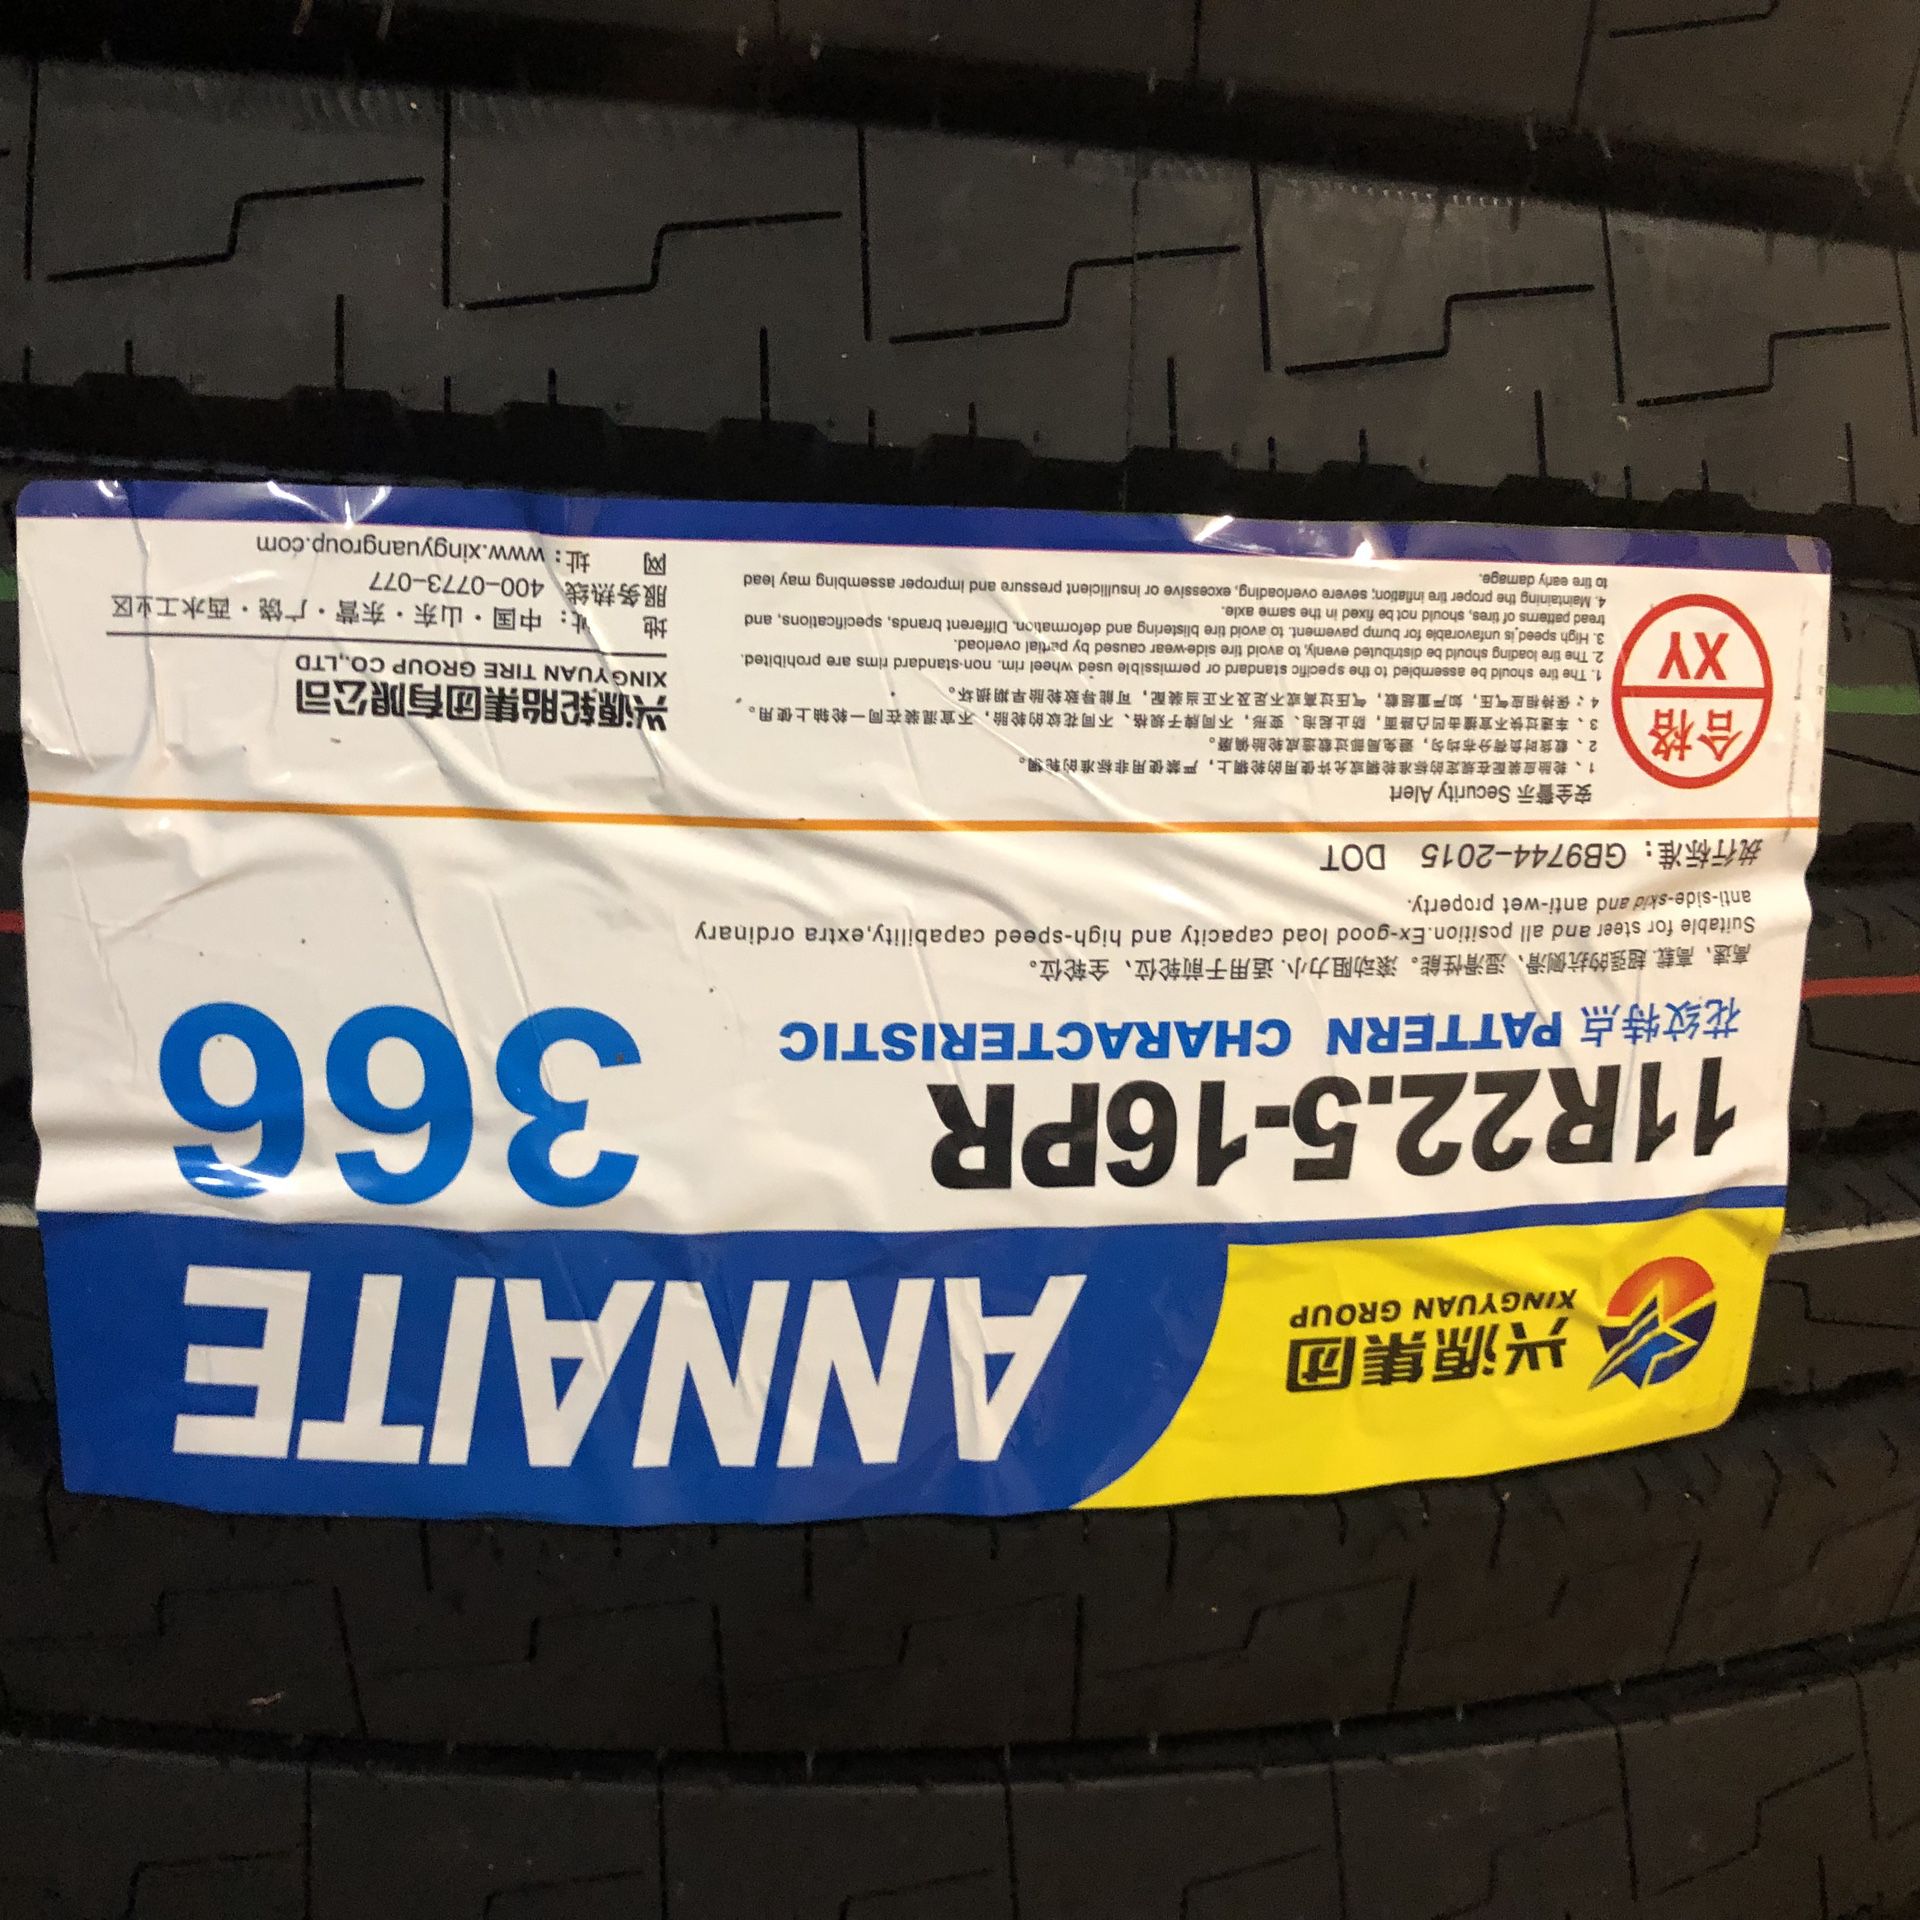 Tires for semi trailers and tractors